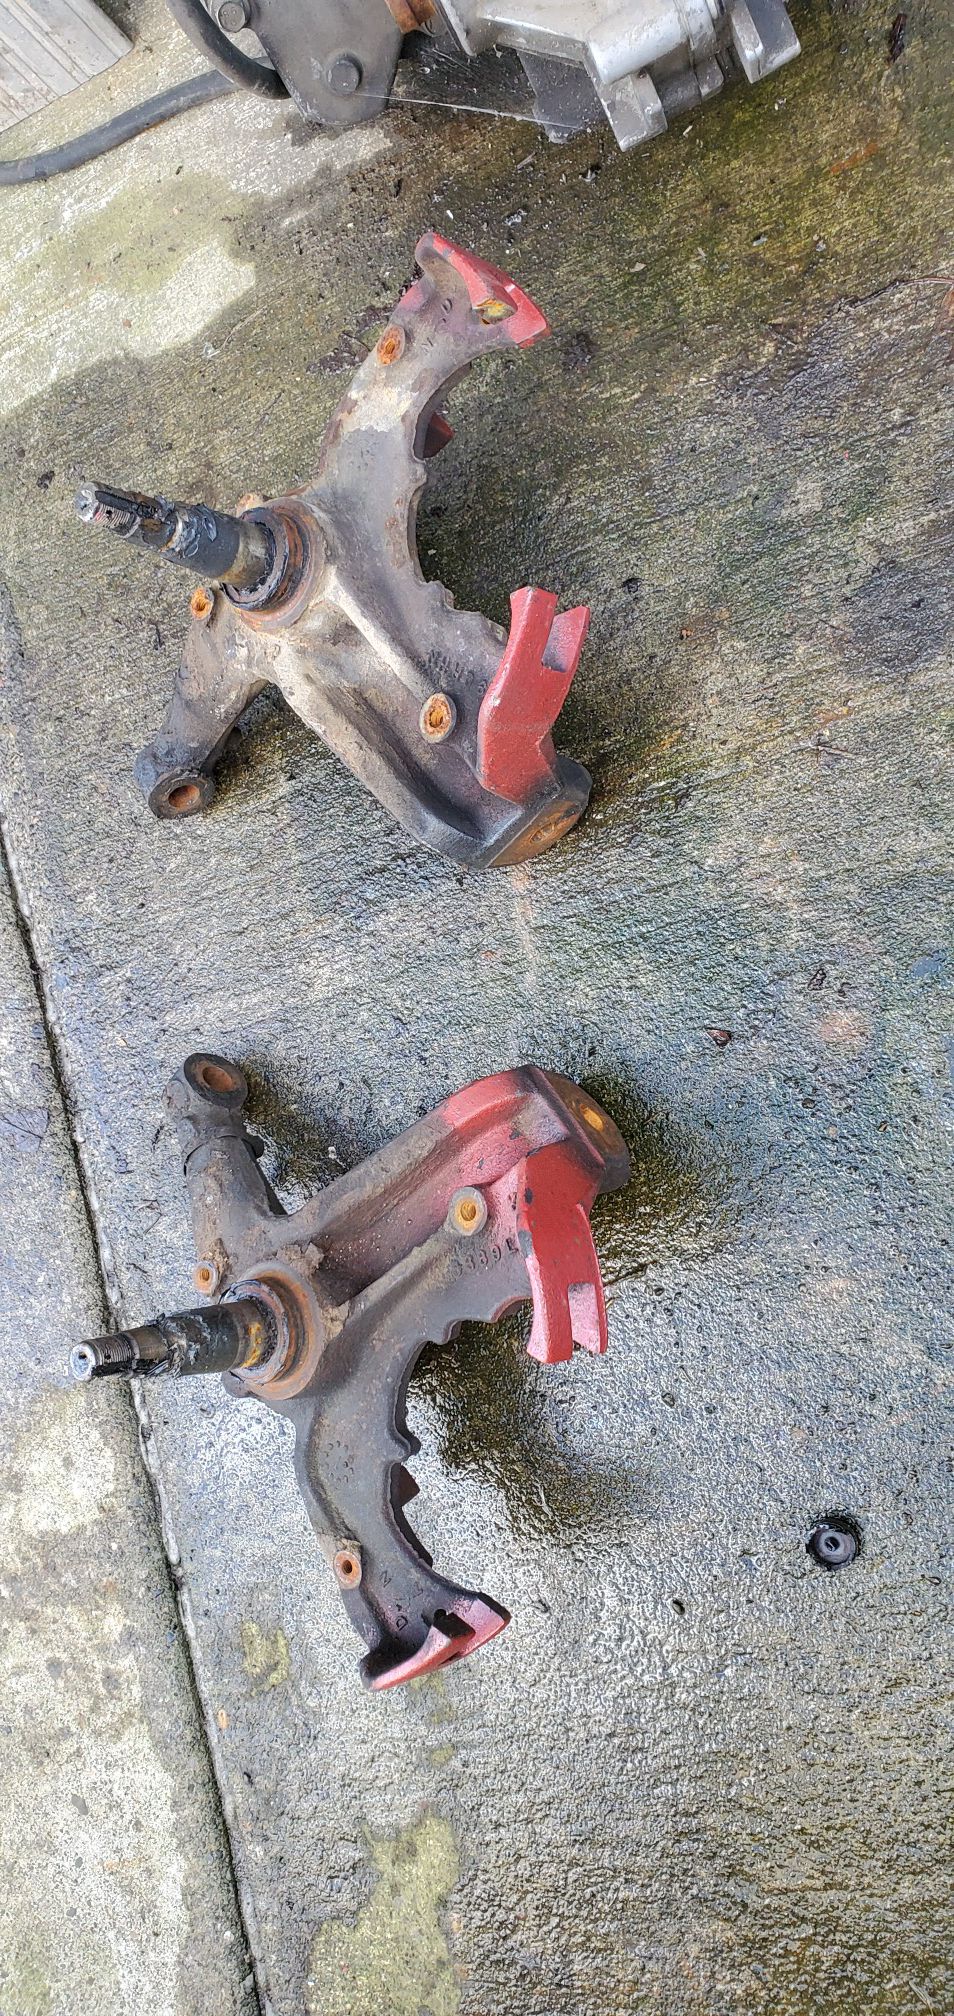 1985 chevy disc brakes stock spindles